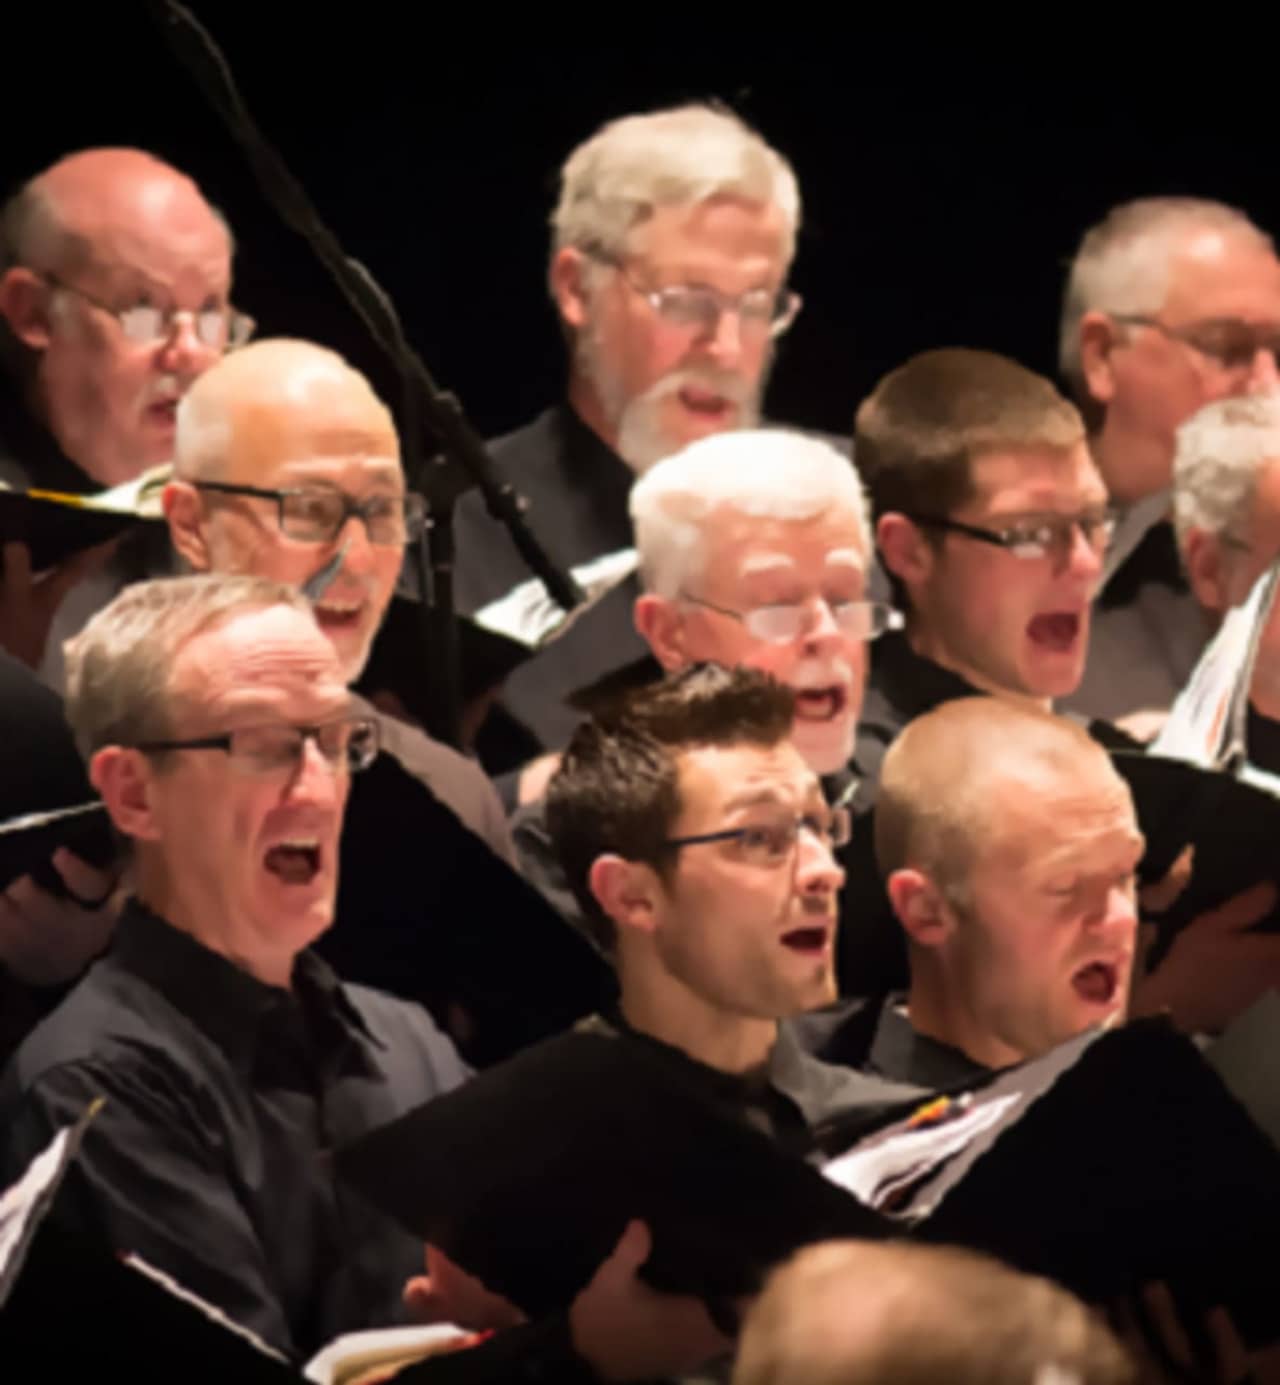 The Hudson Valley Philharmonic's performance of Handel's "Messiah" will be aired at 1 p.m. Christmas Day on the classical radio station WRHV-FM 88.7.